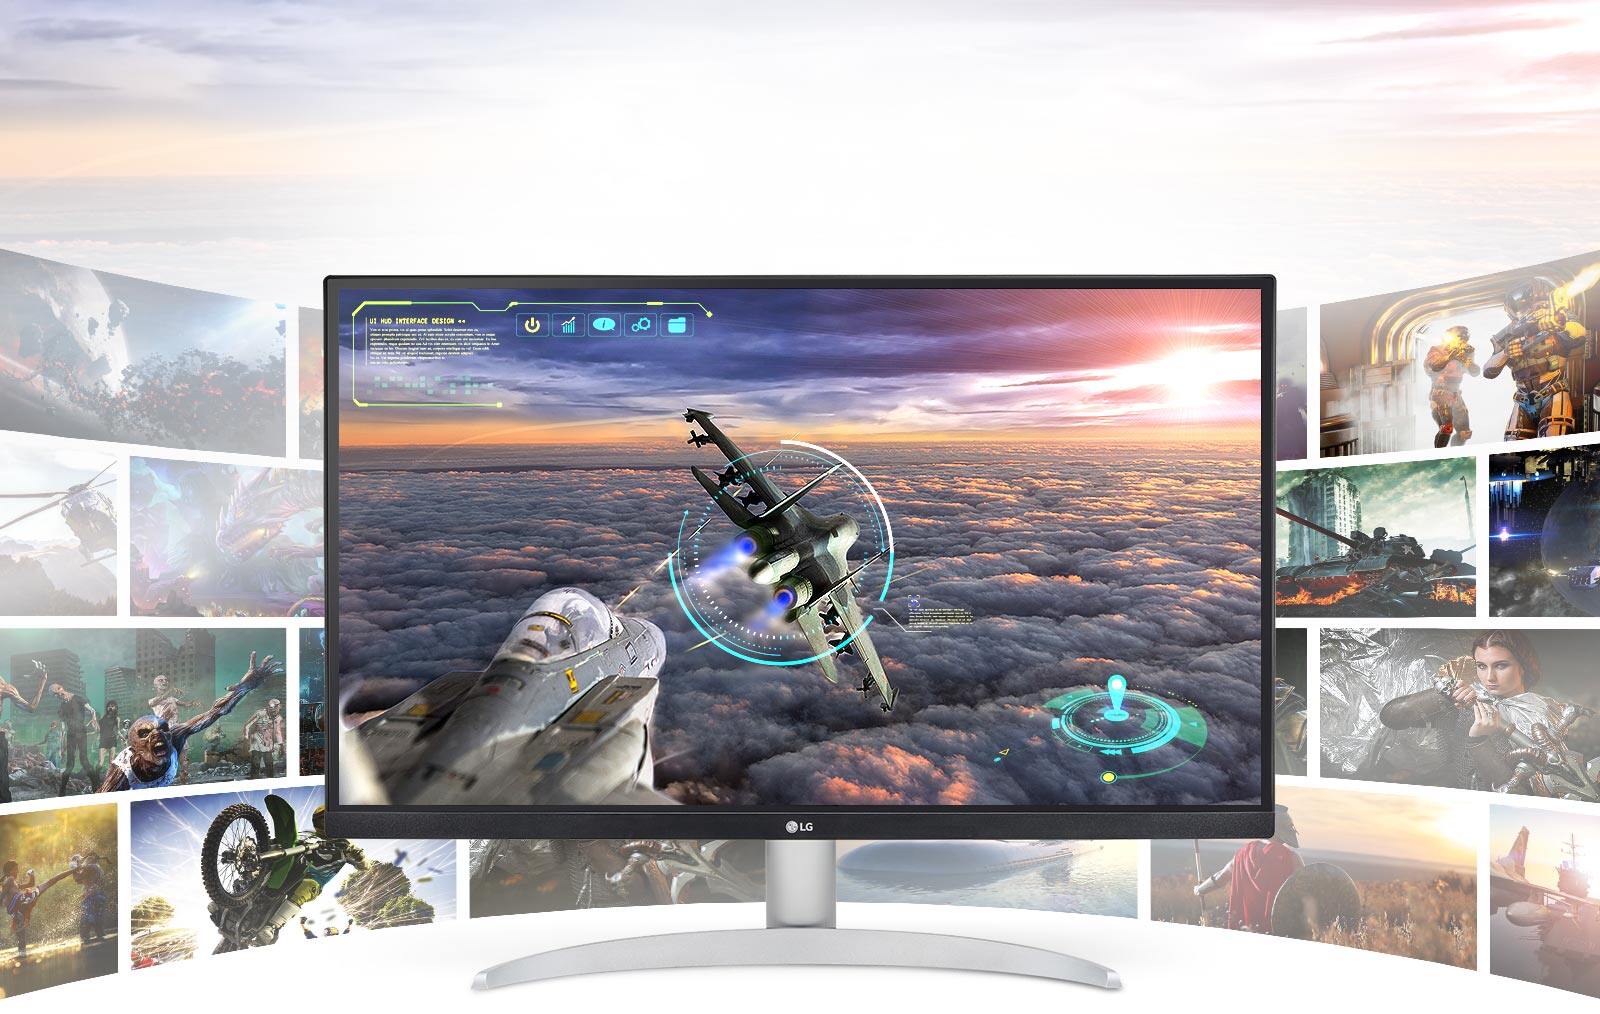 Gaming scene with exceptional clarity, and details in LG UHD 4K display